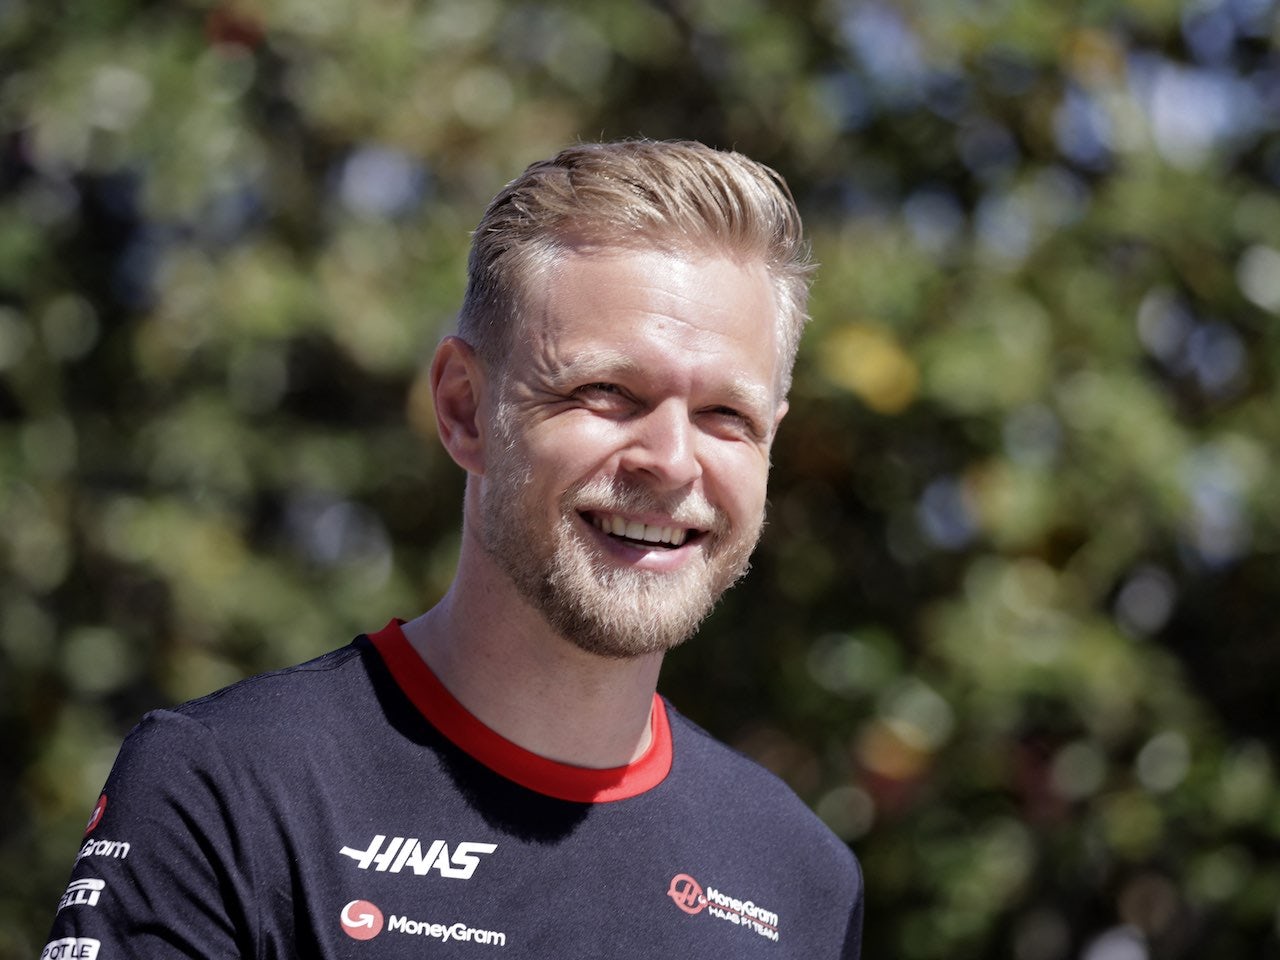 New baby on the way for Magnussen family